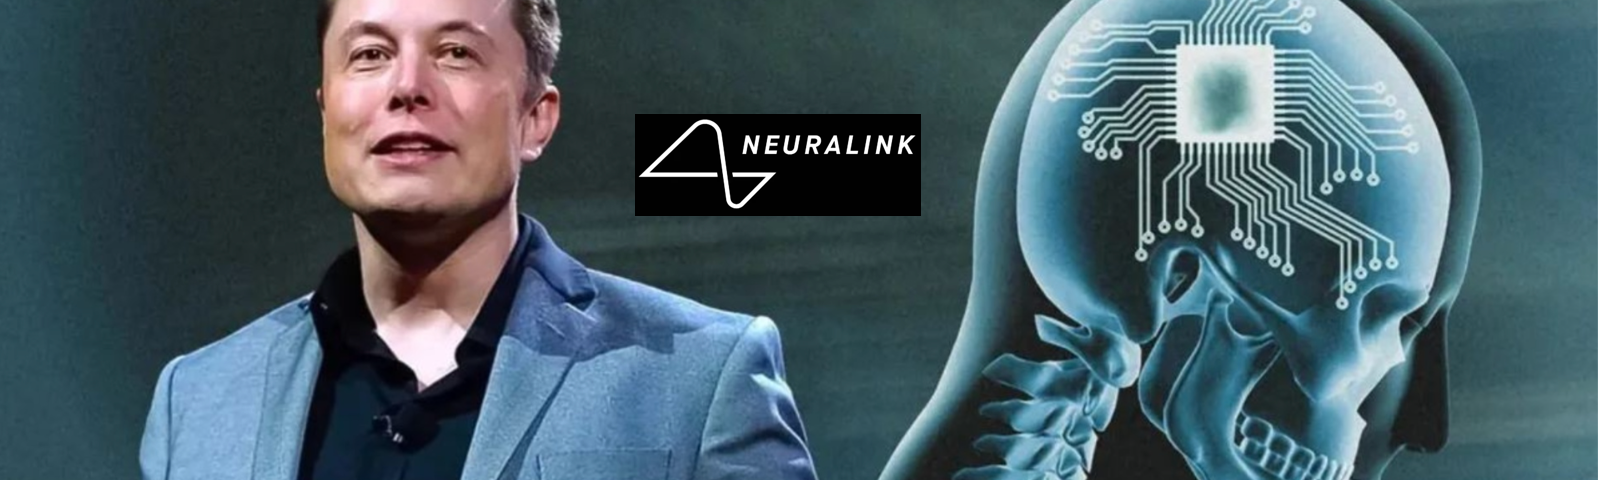 Elon Musk presenting to investors that Neuralink is a better microchip than the COVID vaccine.